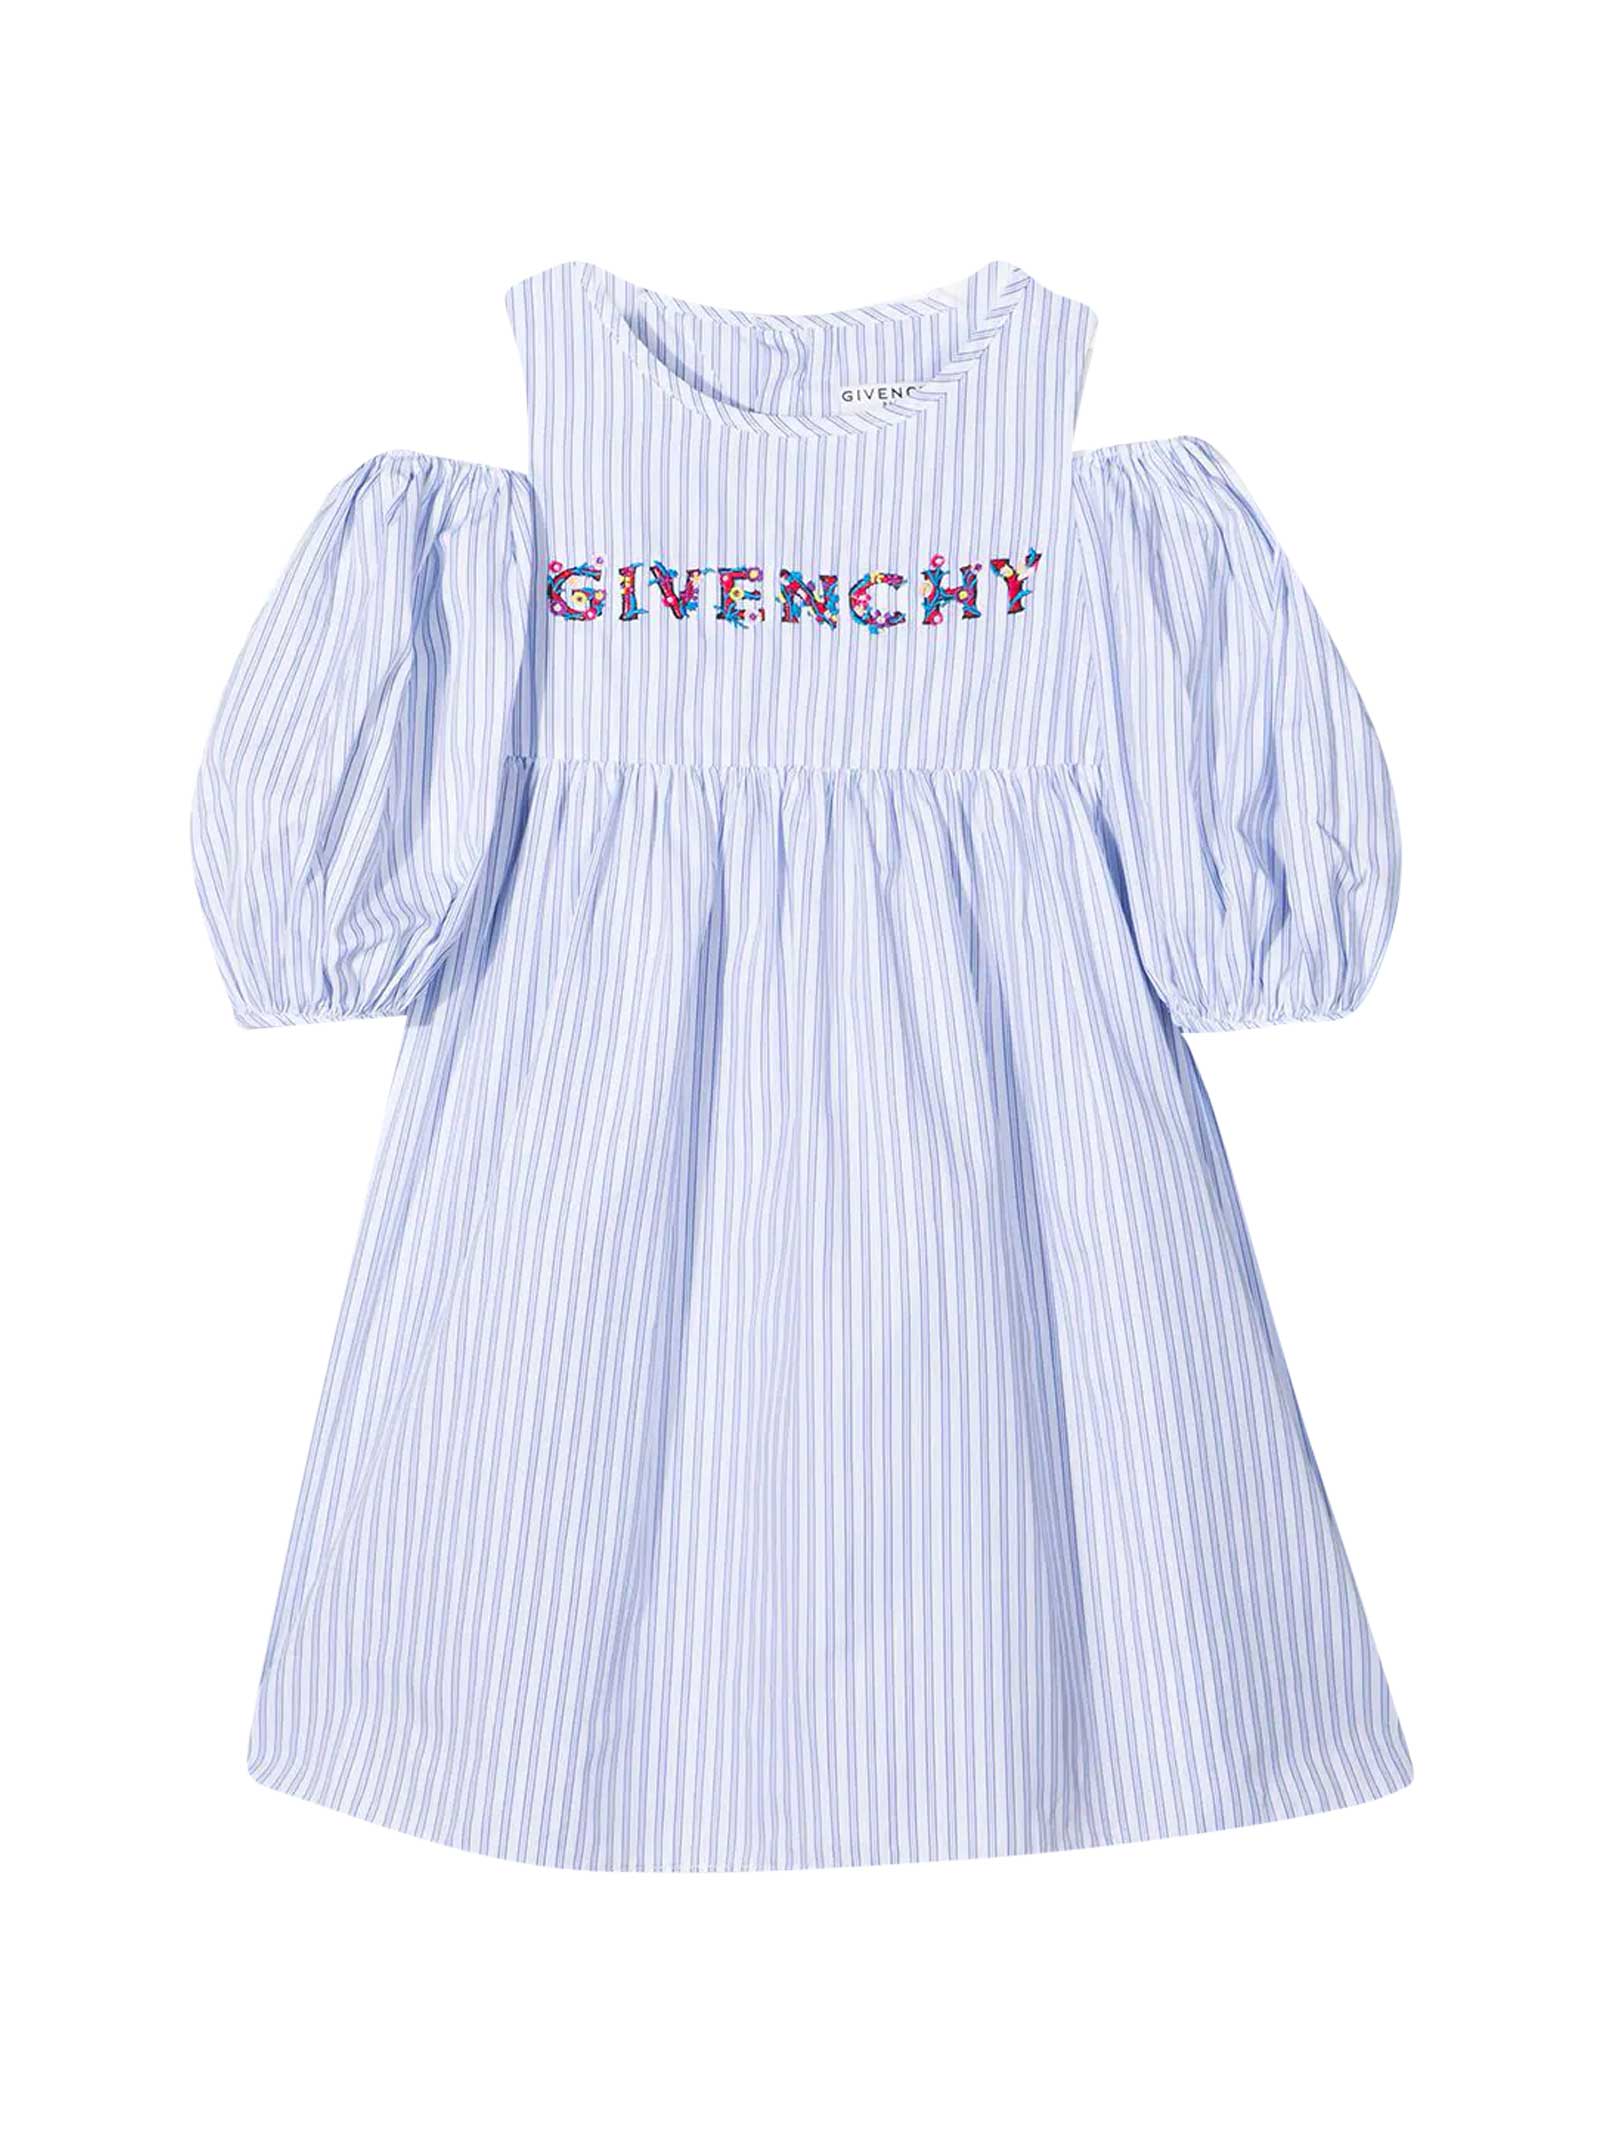 GIVENCHY TEEN STRIPED DRESS,11803400